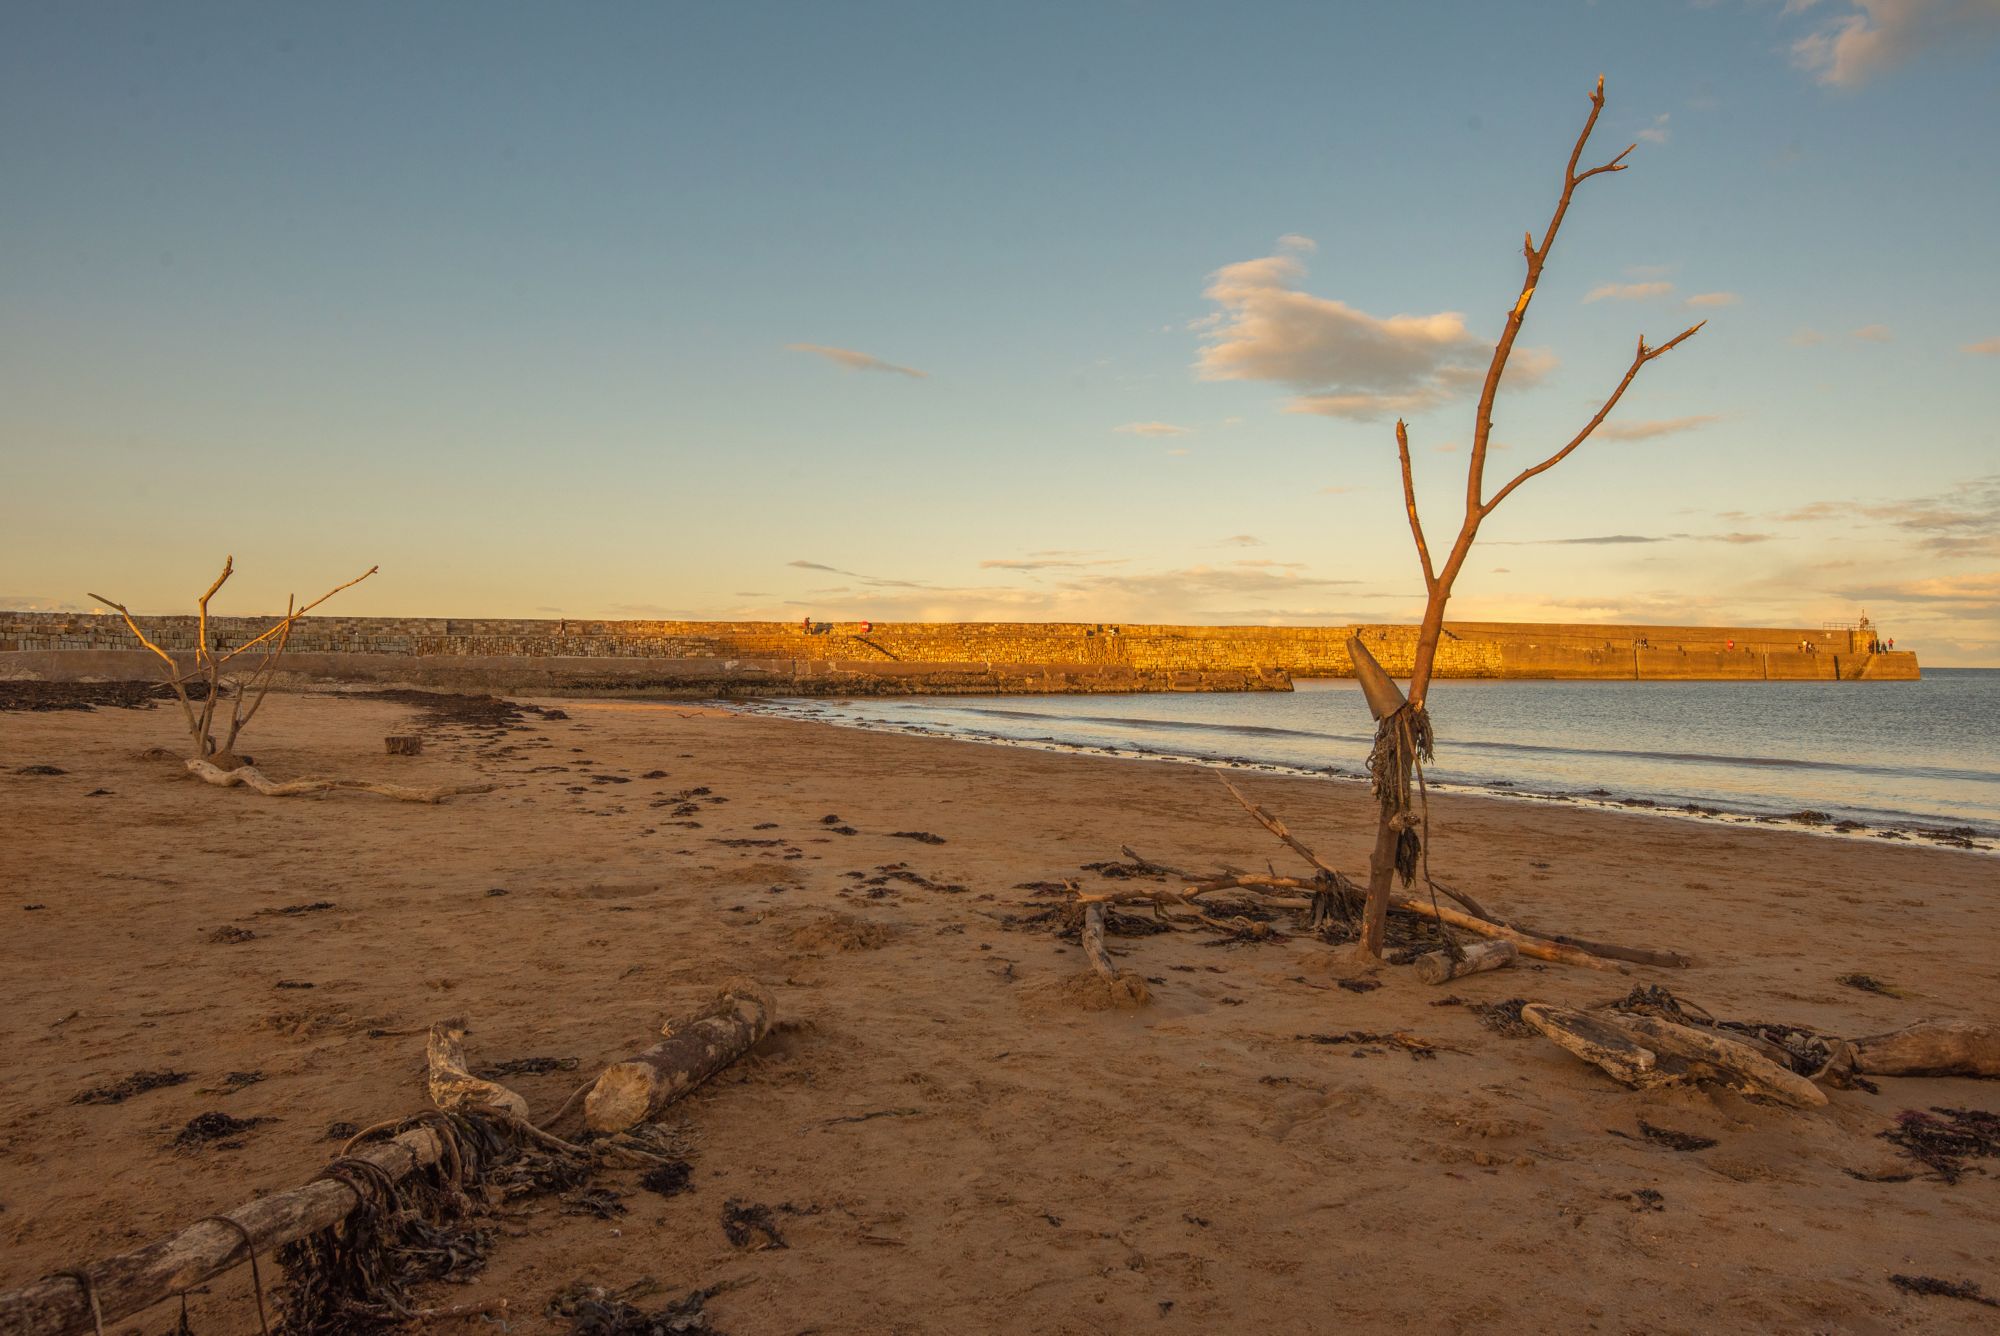 Landscape image of East Sands beach, St Andrews. A long stone wall pier lines the background and in the foreground, large pieces of driftwood are seen dotted along the sandy beach.